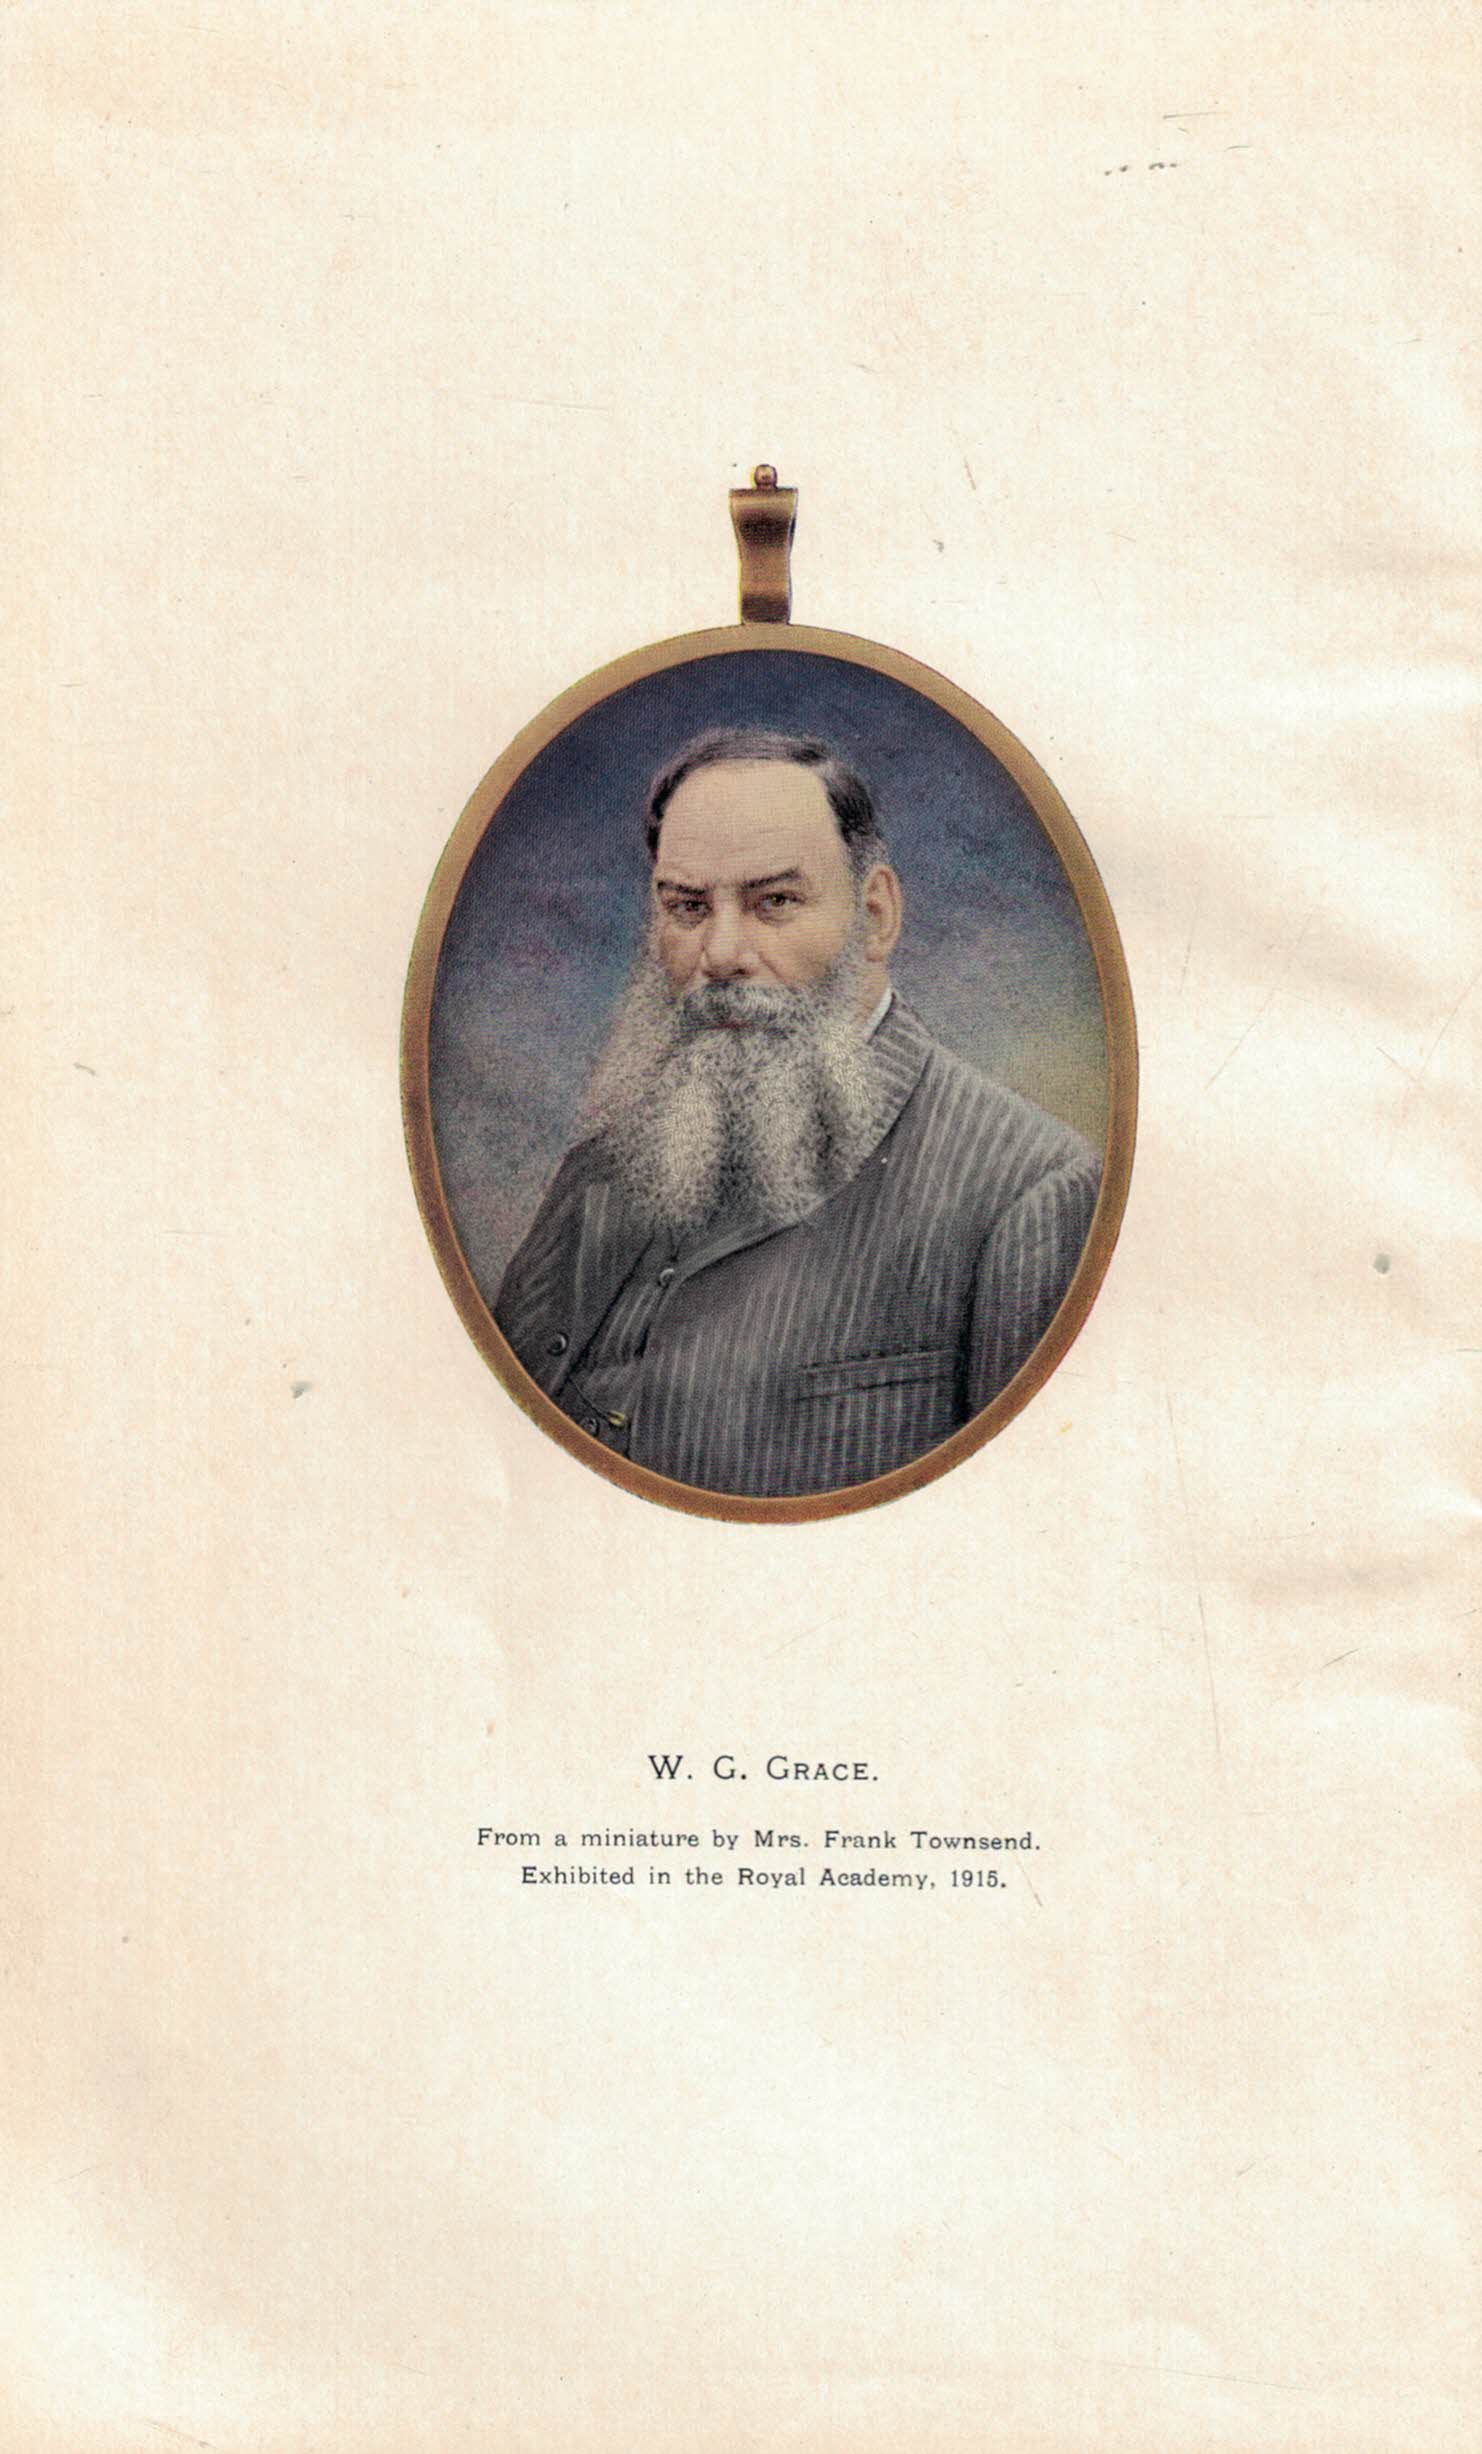 The Memorial Biography of Dr W G Grace